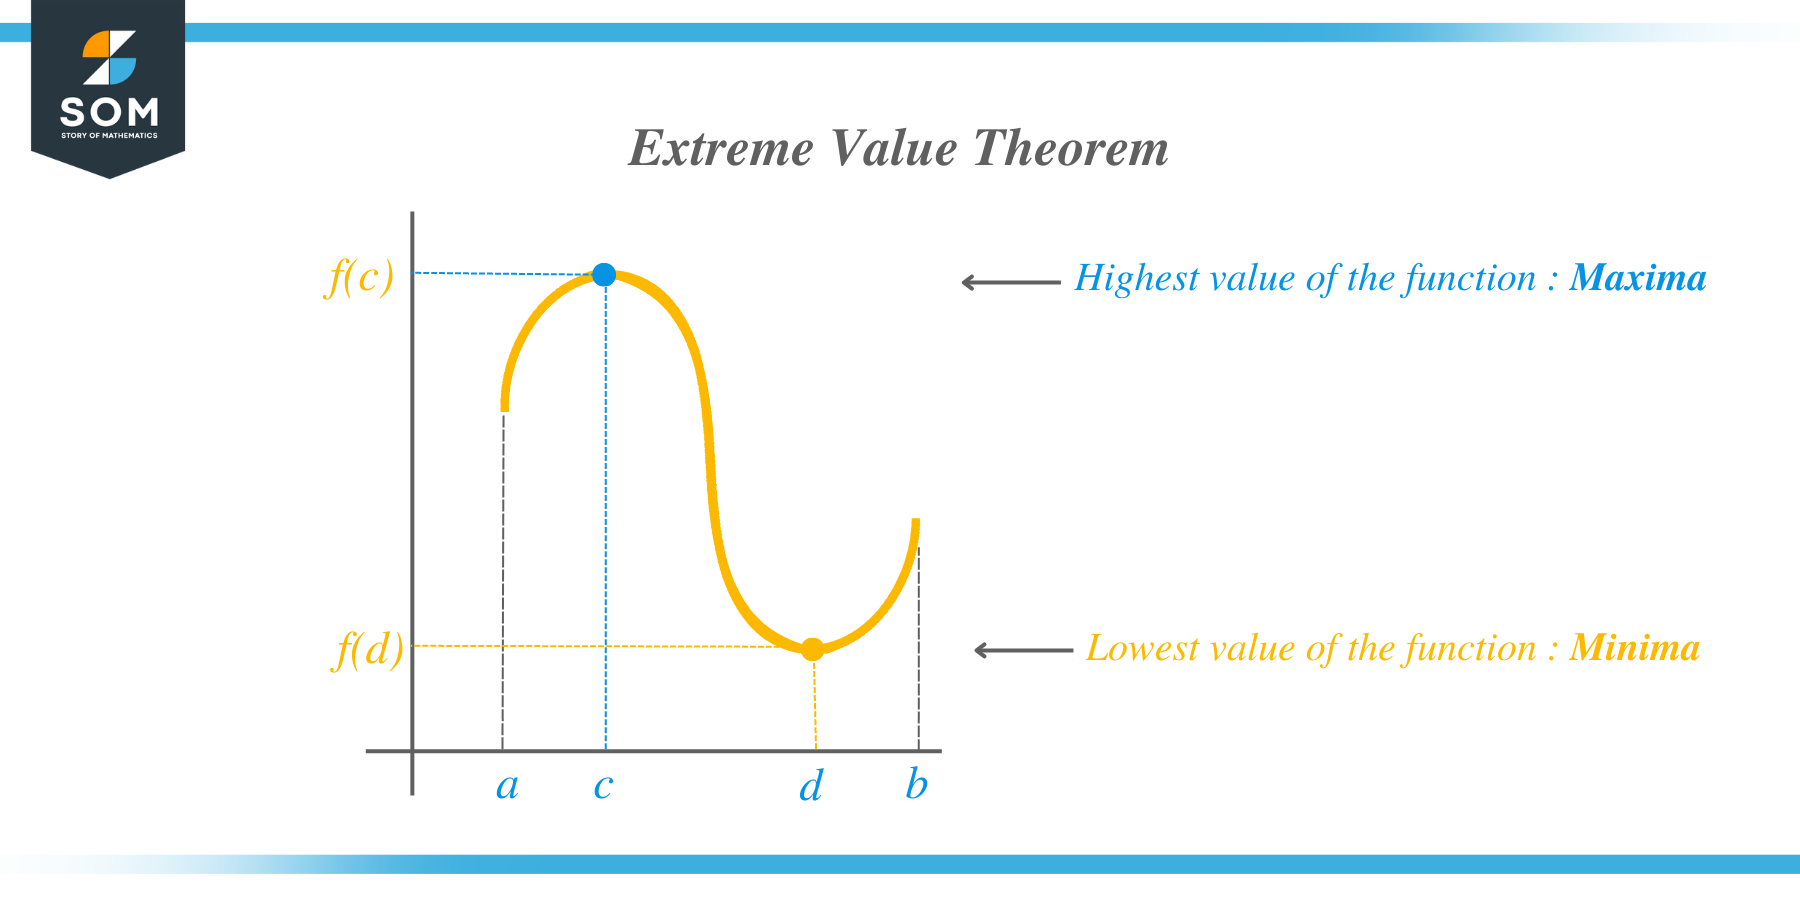 What Is Extreme Value Theorem?